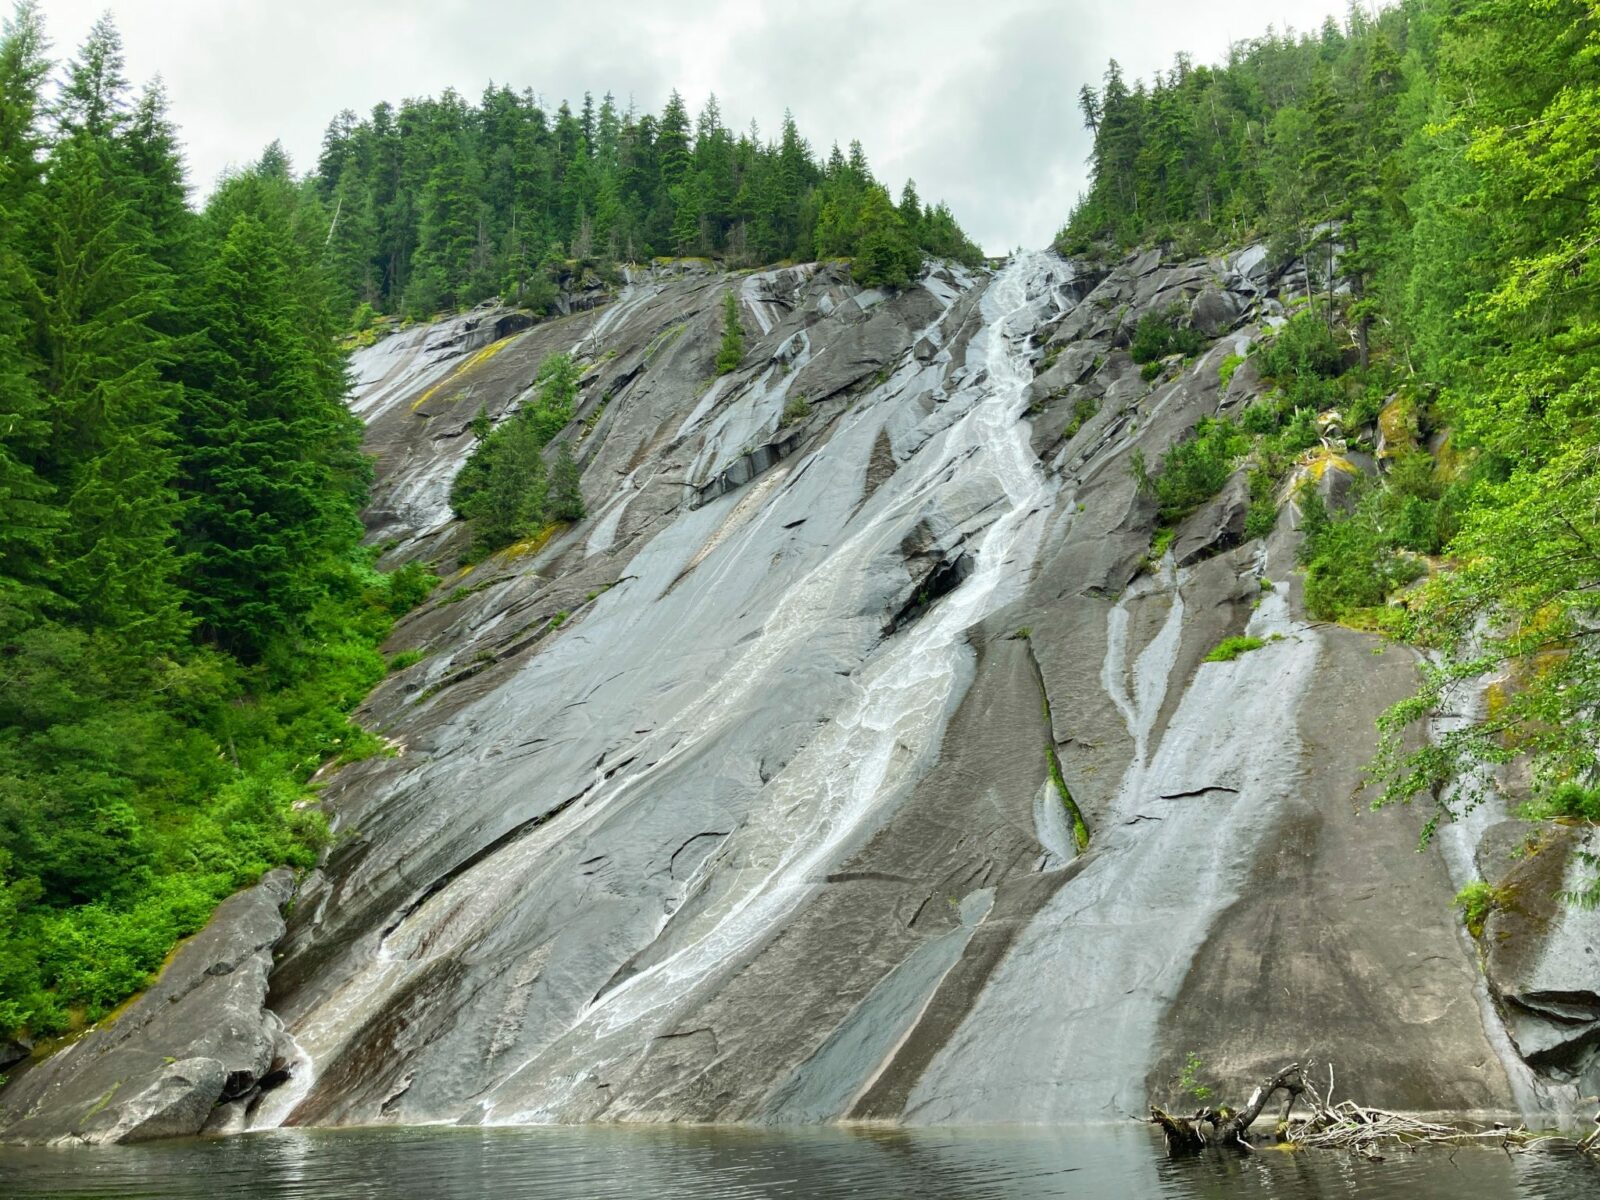 Otter Falls, one of the longer hikes near north bend, spills over a high rock and then spreads out over the flat surface of a rock next to a small lake. The giant rock face is surrounded by evergreen trees